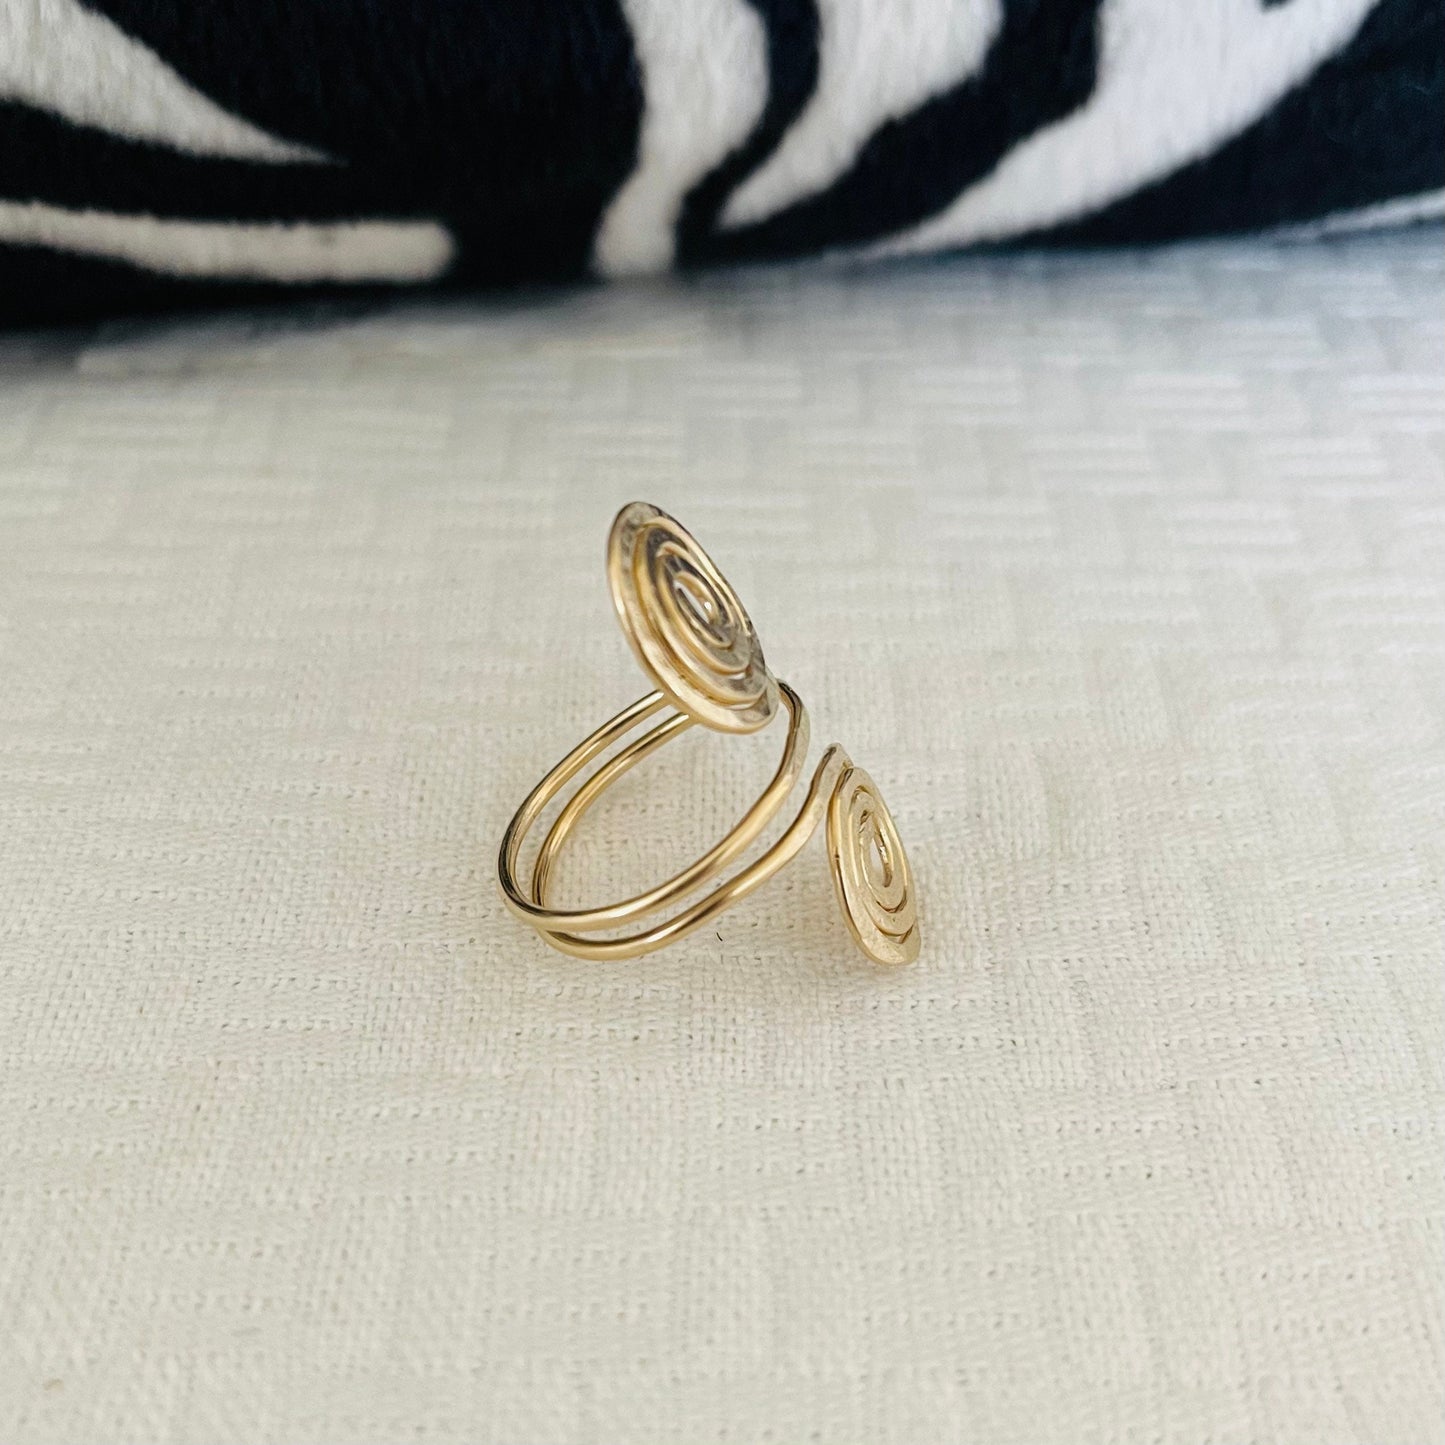 14K Double Swirl Ring Gold Filled Spirals